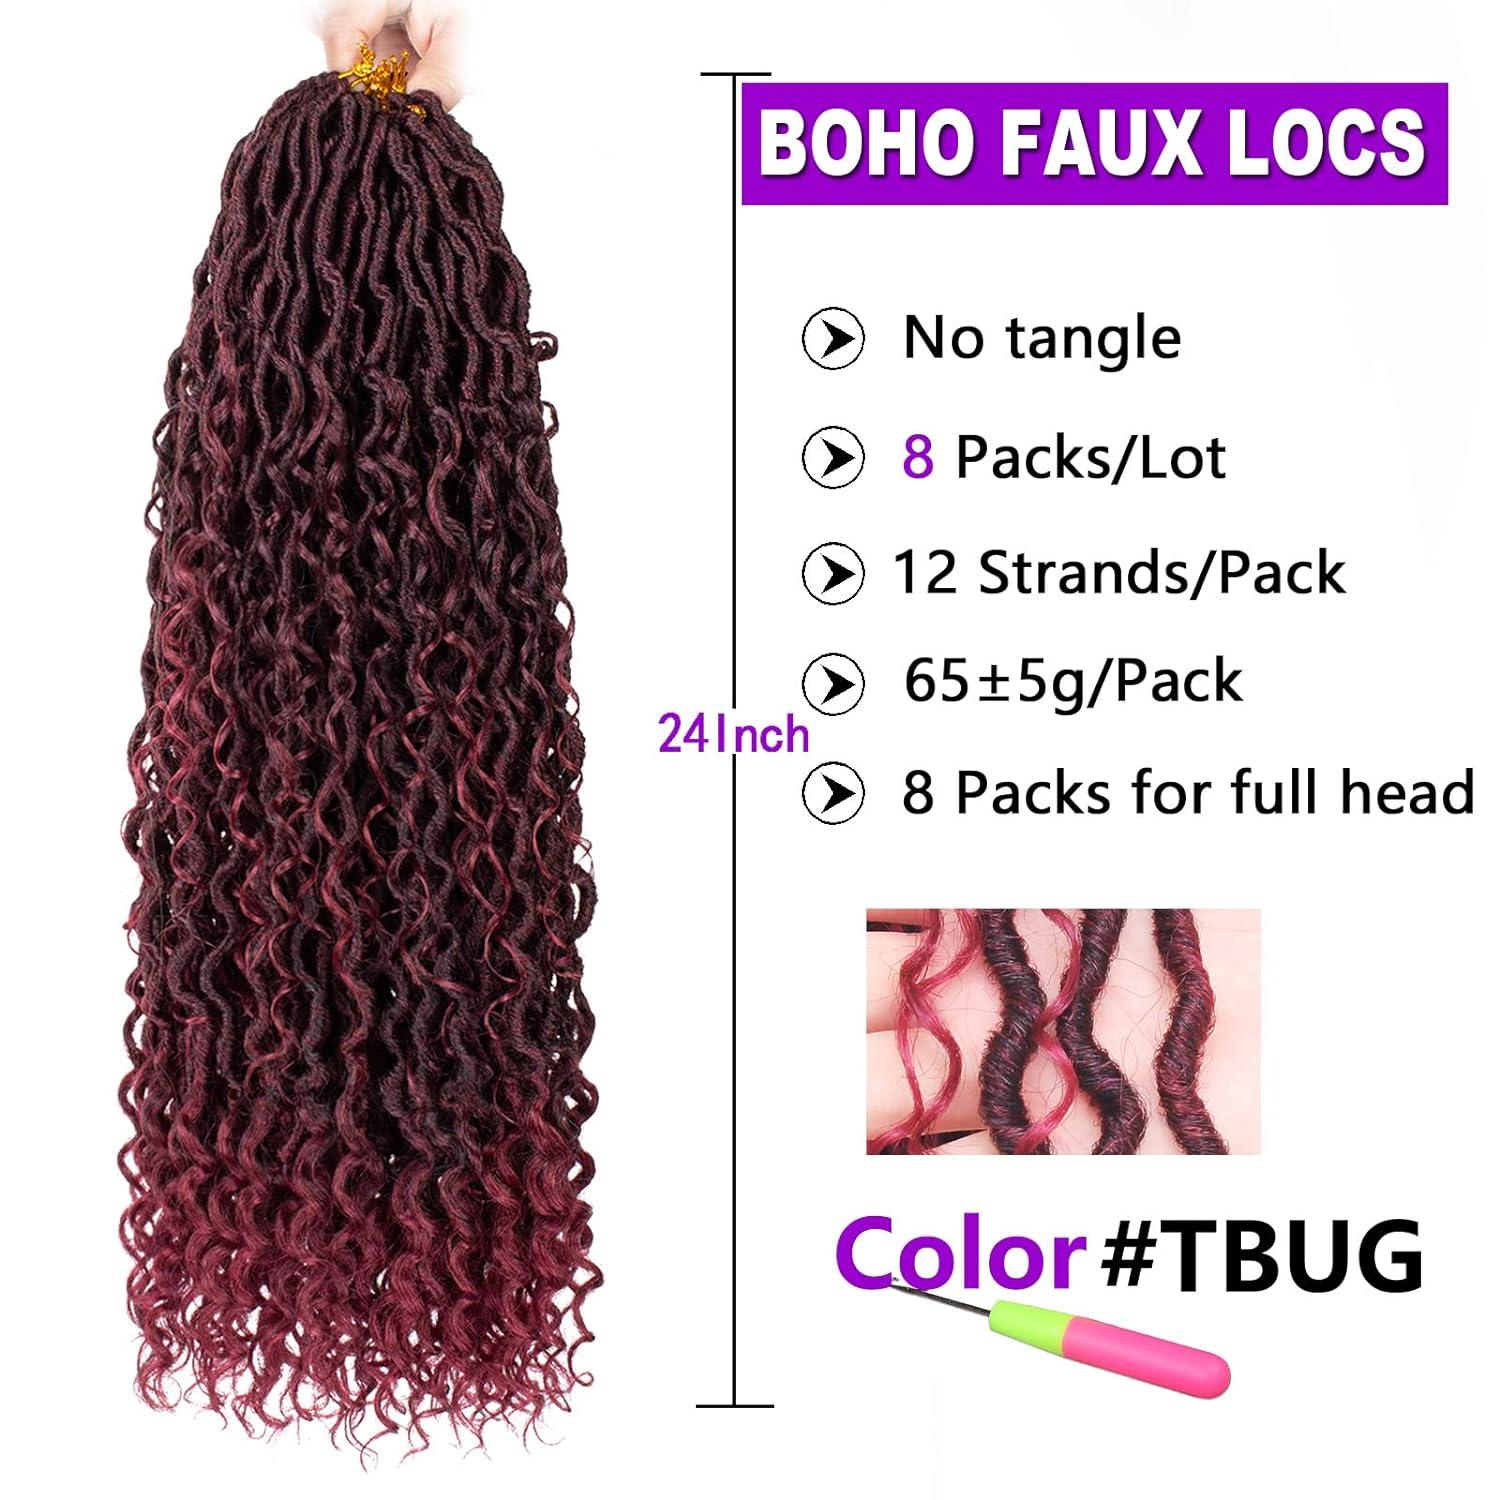 ZRQ 8 Packs Burgundy Goddess Locs Crochet Hair 24 Inch Ombre Boho Faux Locs  Pre Looped Hipple Locs Curly Soft Locs Red River Locs Hair Extensions Tbug  24 Inch (Pack of 8) TBUG